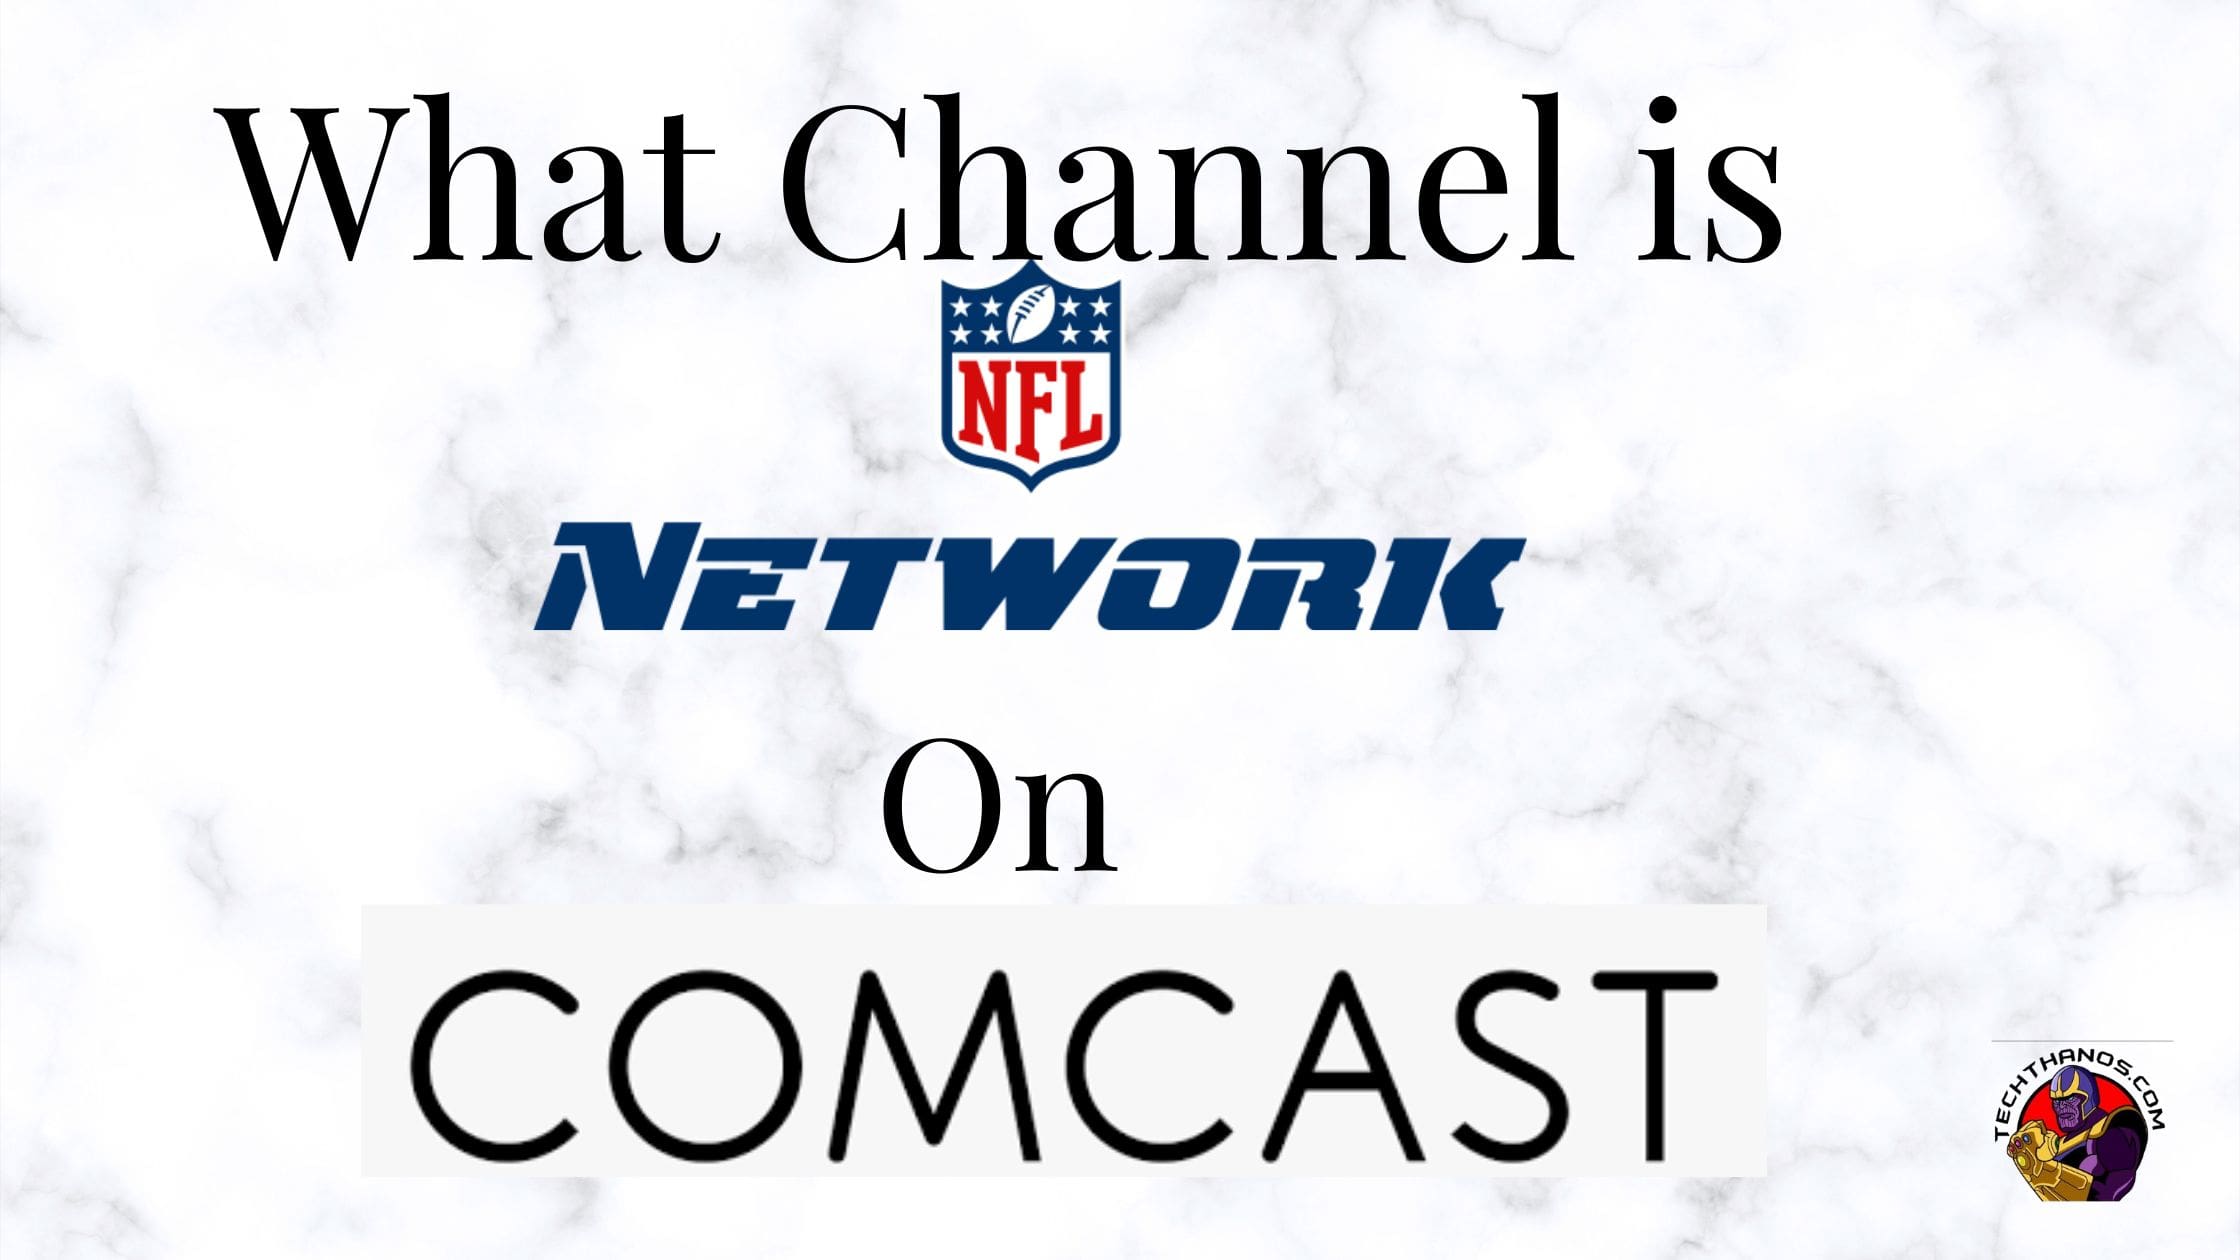 What Channel is NFL Network on Comcast